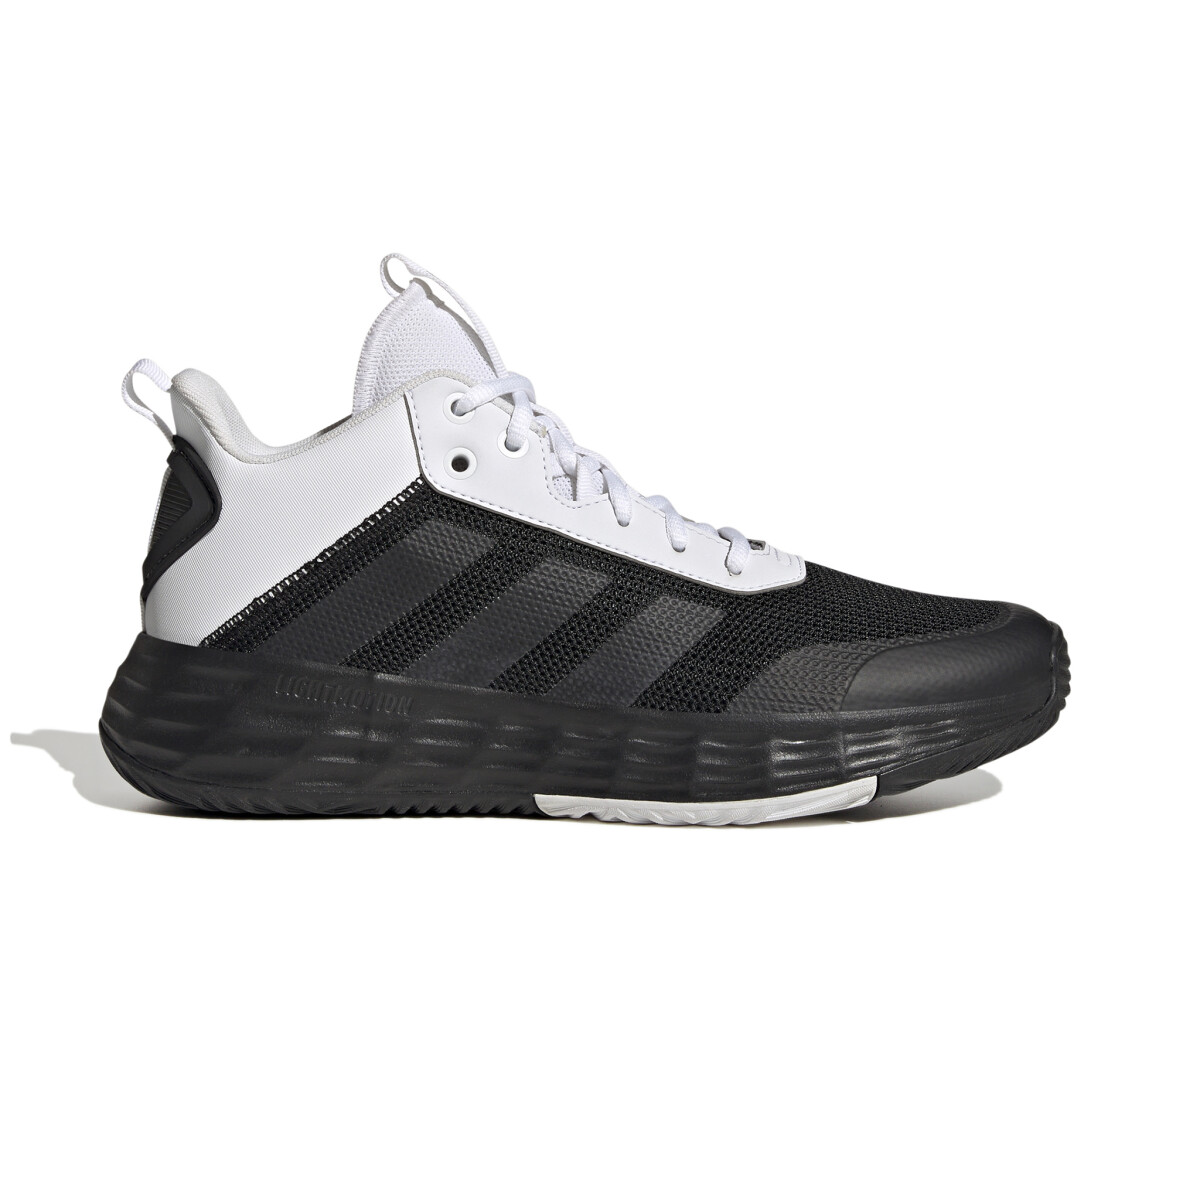 adidas OWN THE GAME 2.0 LIGHTMOTION MID - Core Black / Core Black / Cloud White 